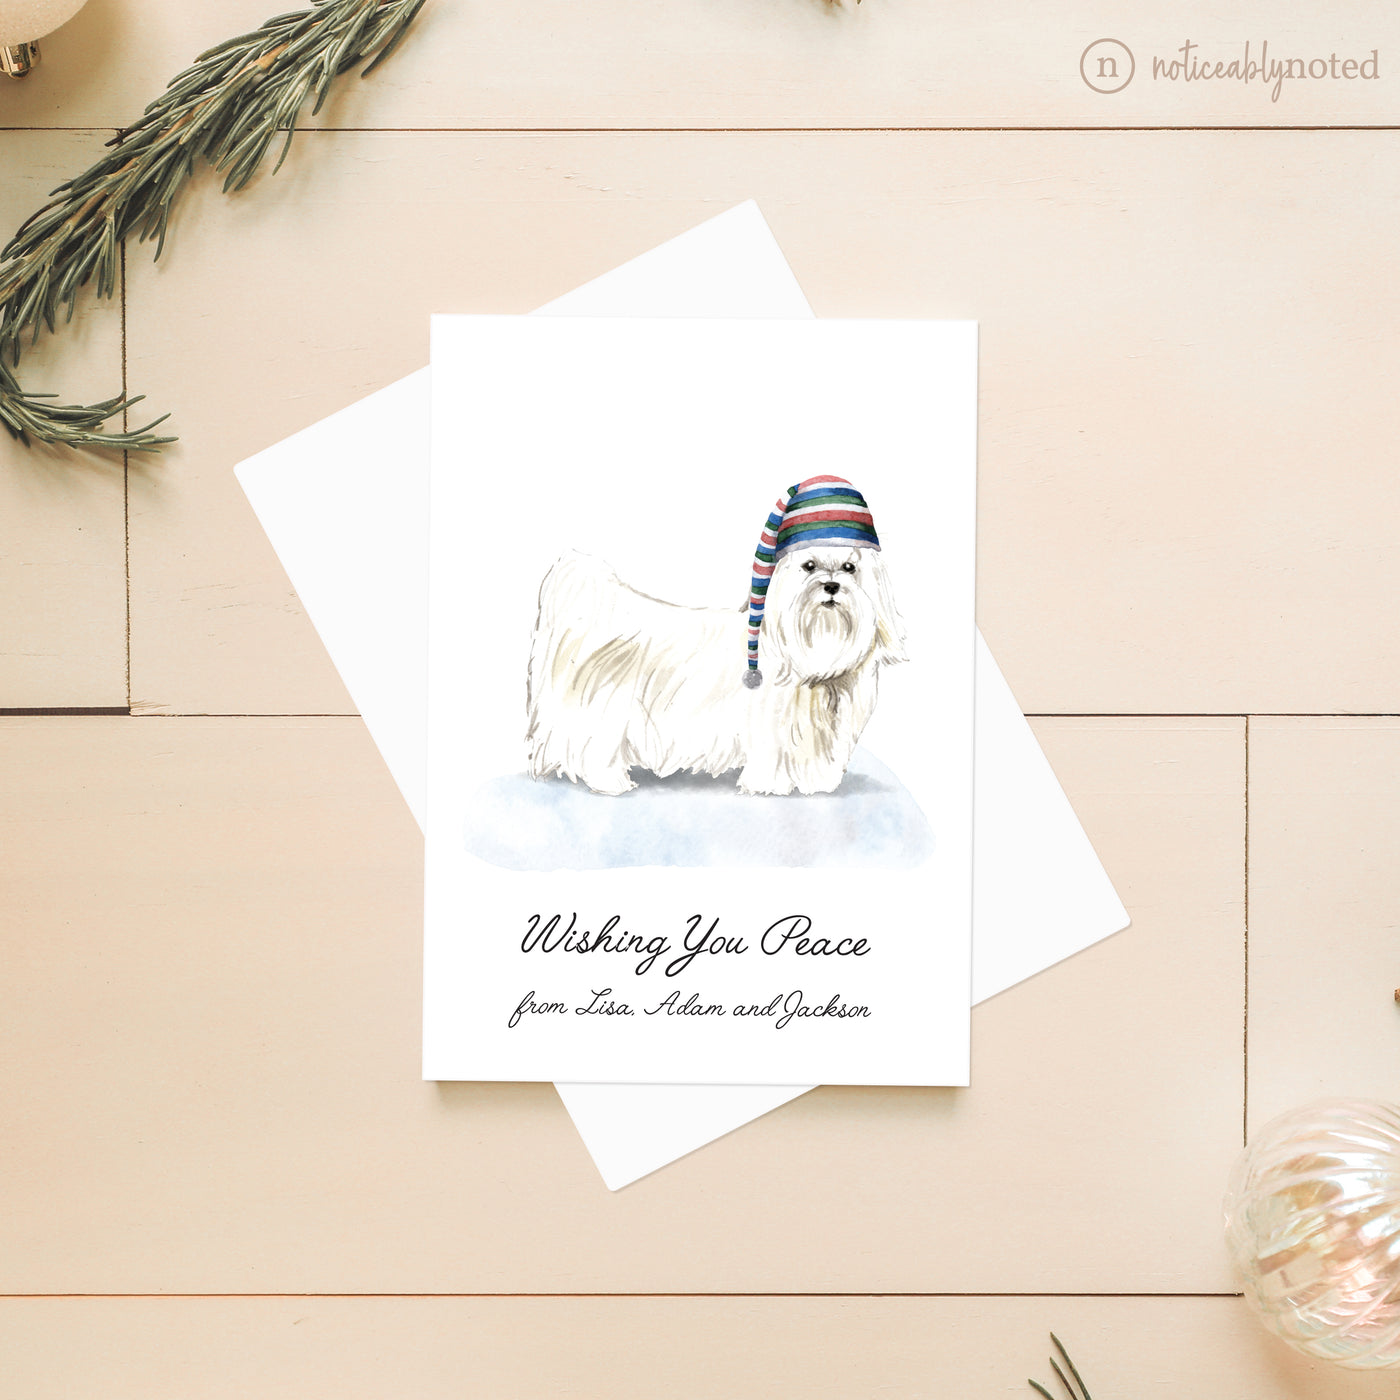 Maltese Dog Christmas Cards | Noticeably Noted